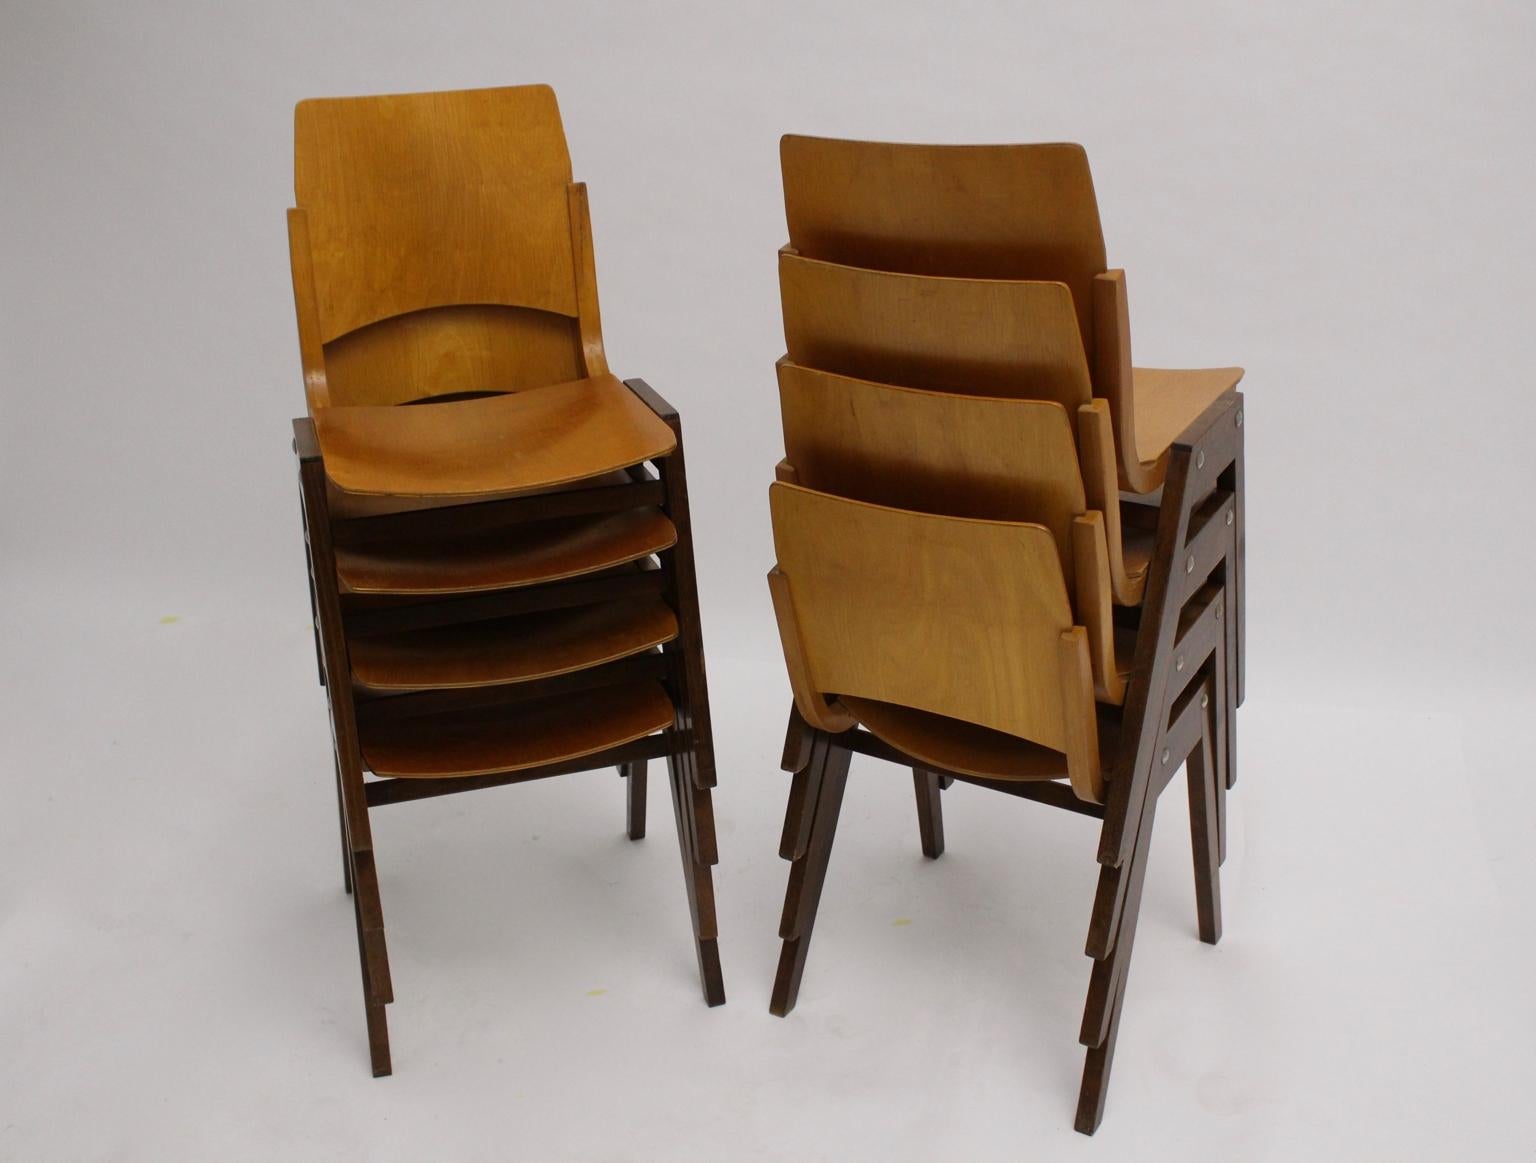 Mid-Century Modern Beech Bicolor Dining Room Chairs Roland Rainer Austria 1952 For Sale 1